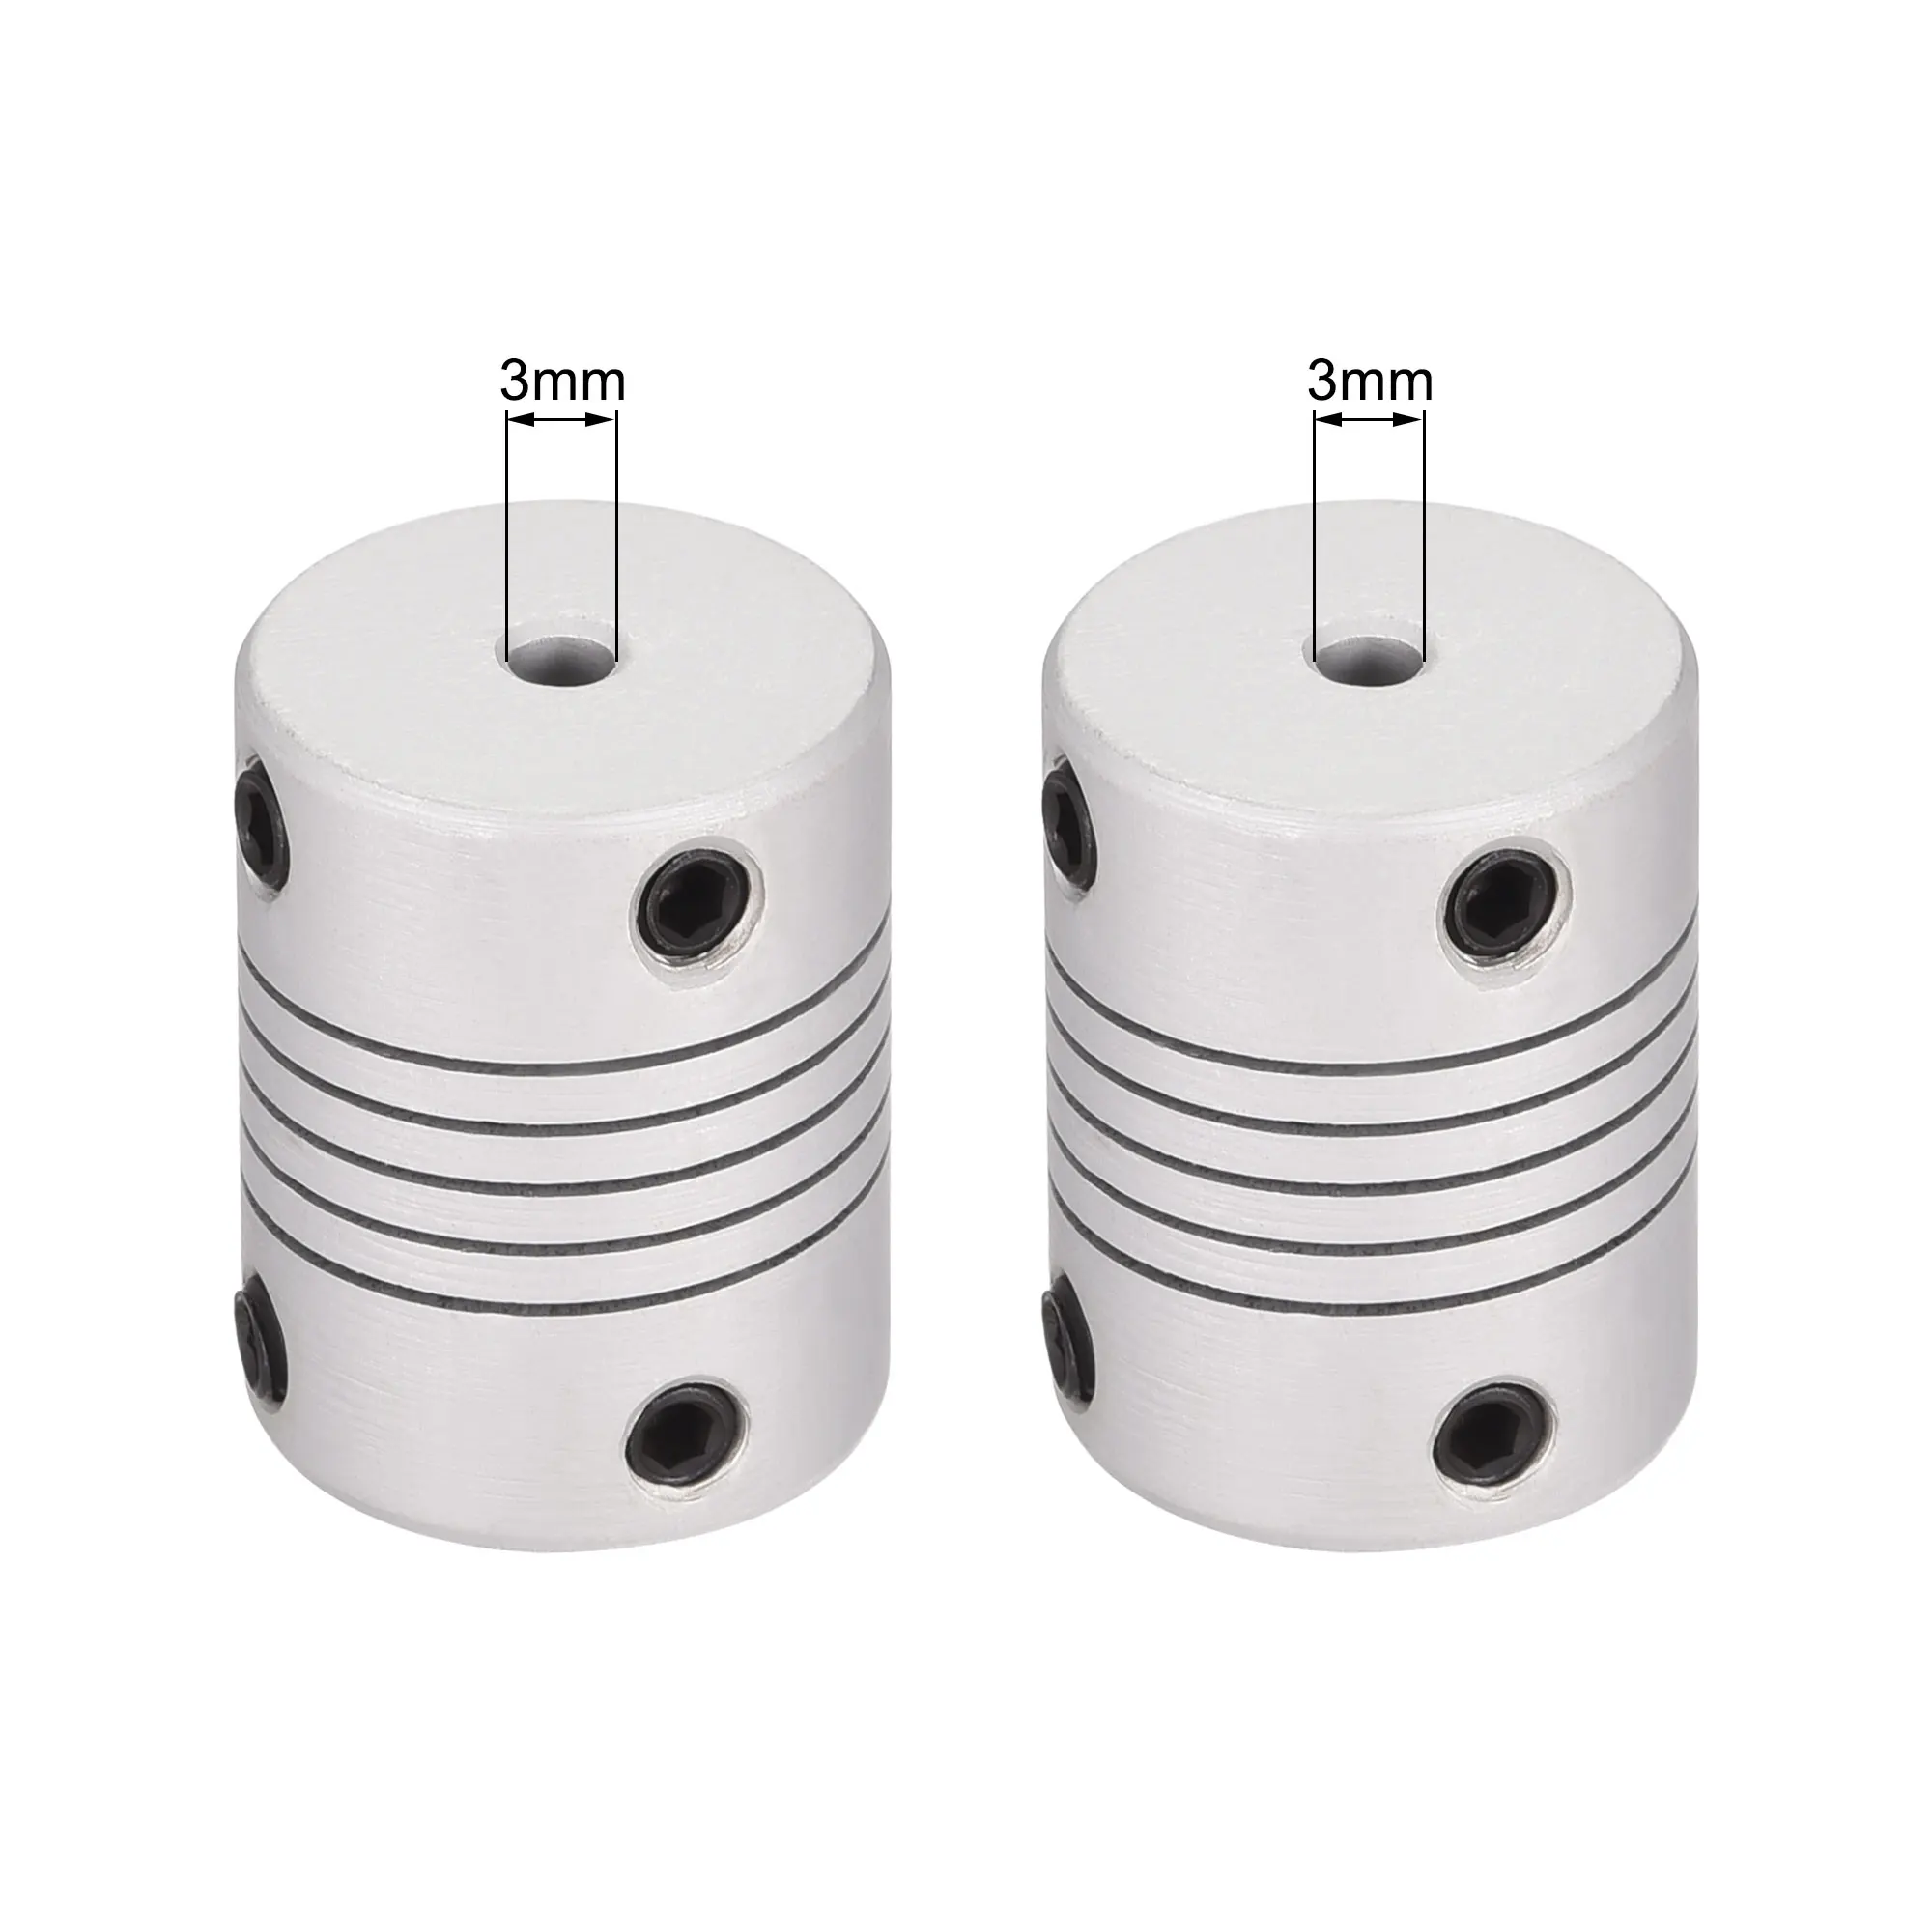 uxcell 10mm to 10mm Aluminum Alloy Shaft Coupling Flexible Coupler Motor Connector Joint L25xD19 Silver,2pcs 